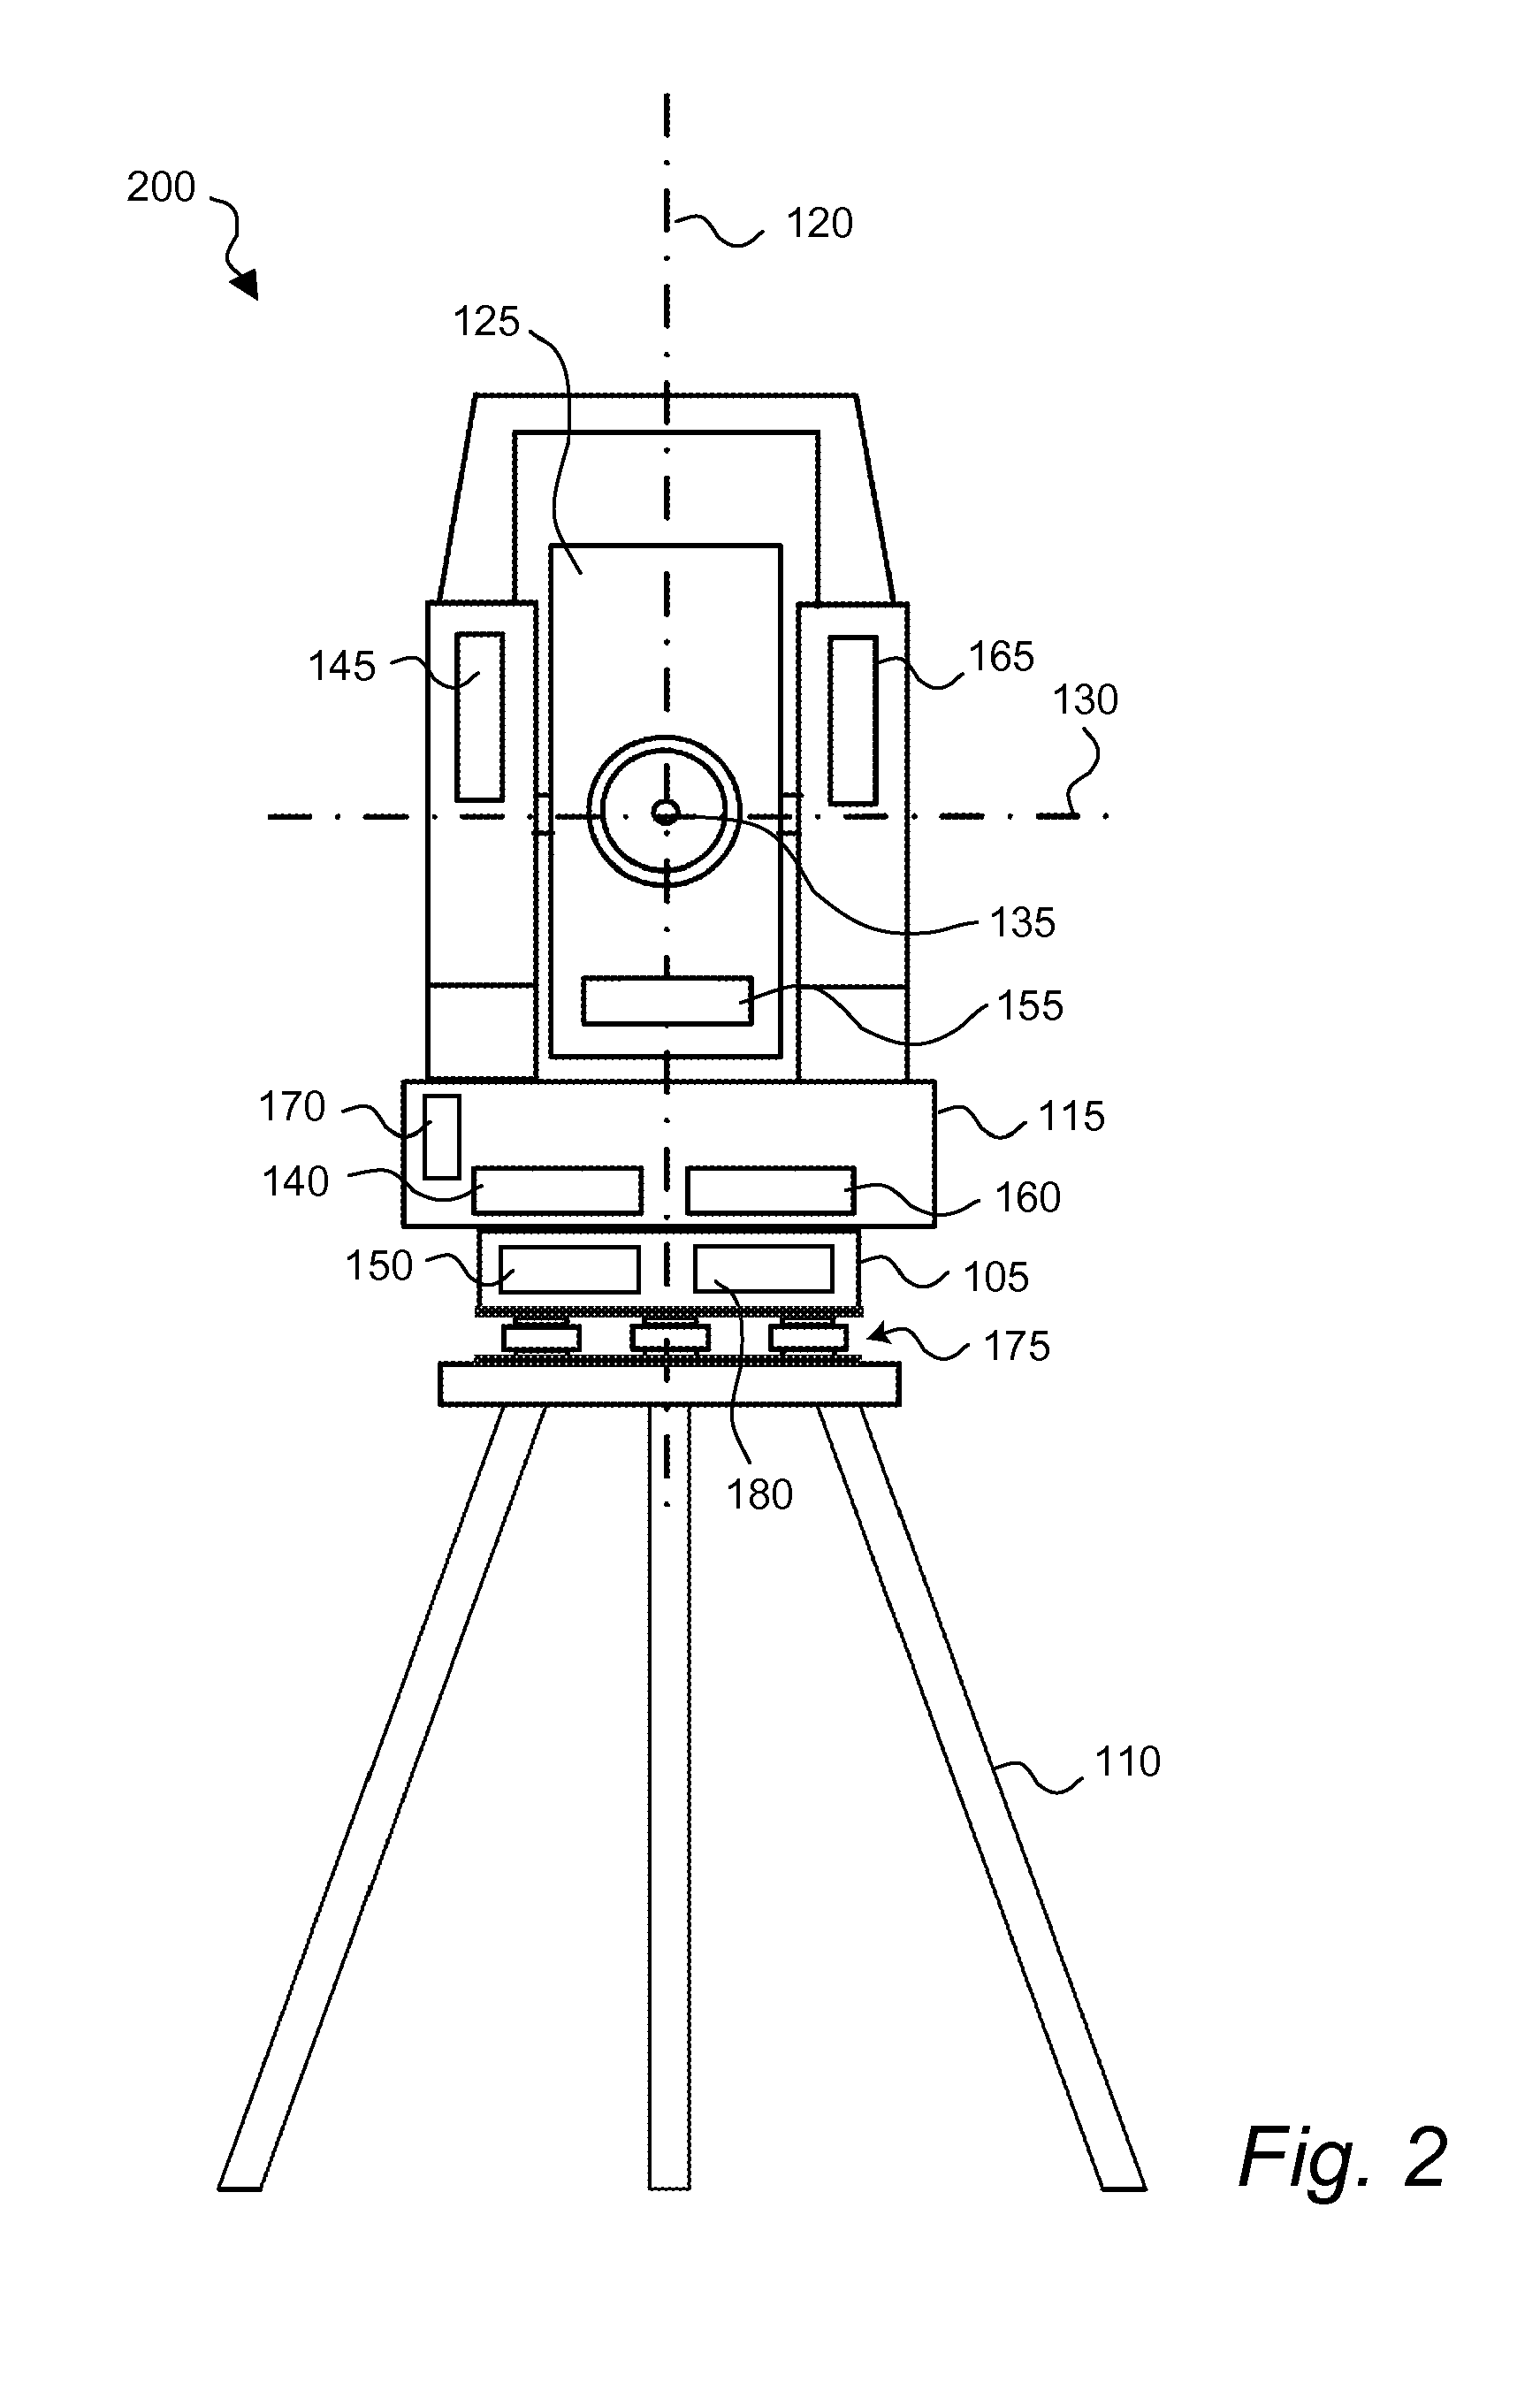 Automated calibration of a surveying instrument